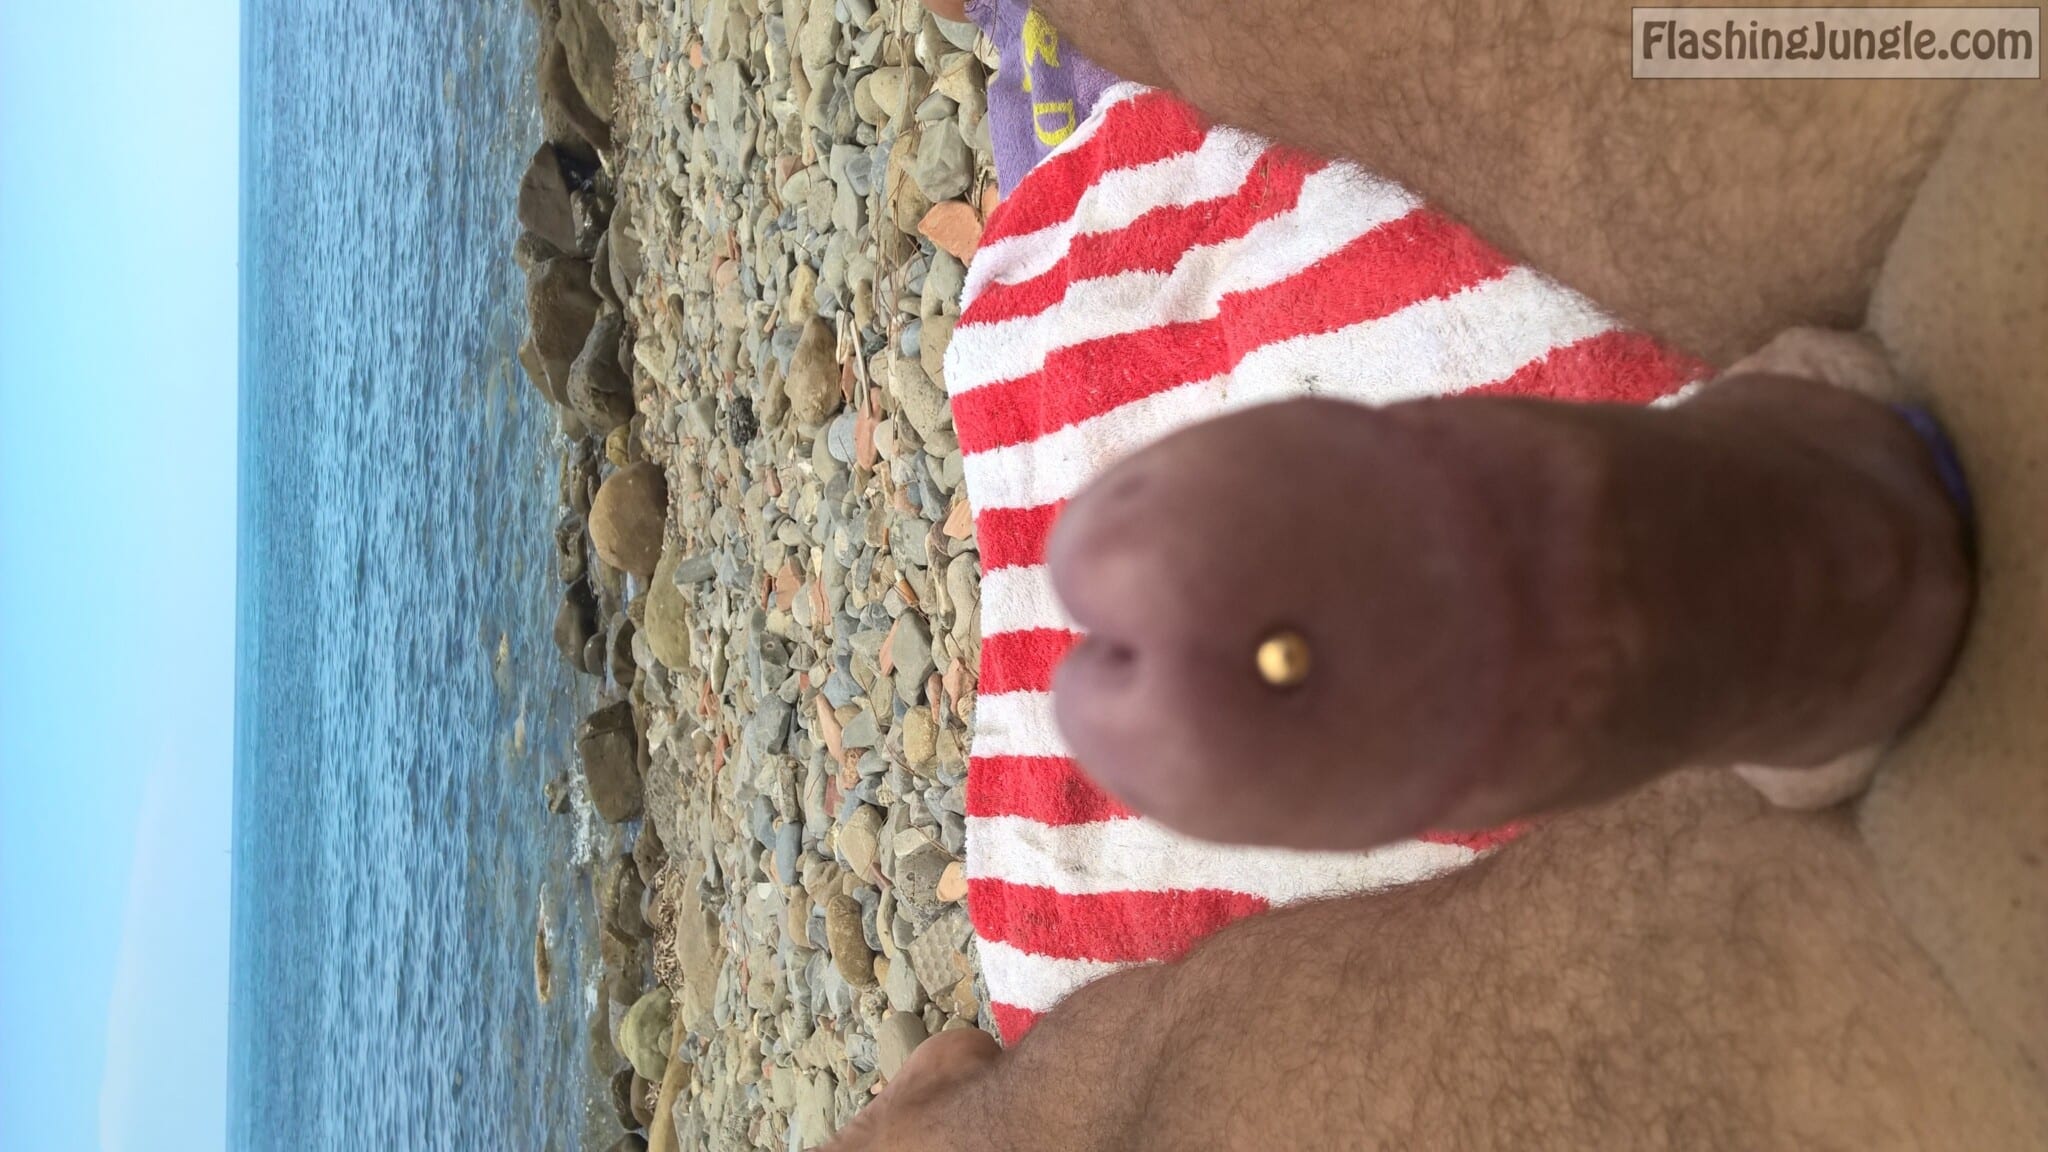 dick flash pics - Amateur dick flash on beach piercing show off Pure amateur naturist and exhibitionist enjoying in touching his small cock in public and showing off his brand new piercing. Public beach dick flash amateur pics submitted by our visitor. nude beach... - Dick Flash Pics